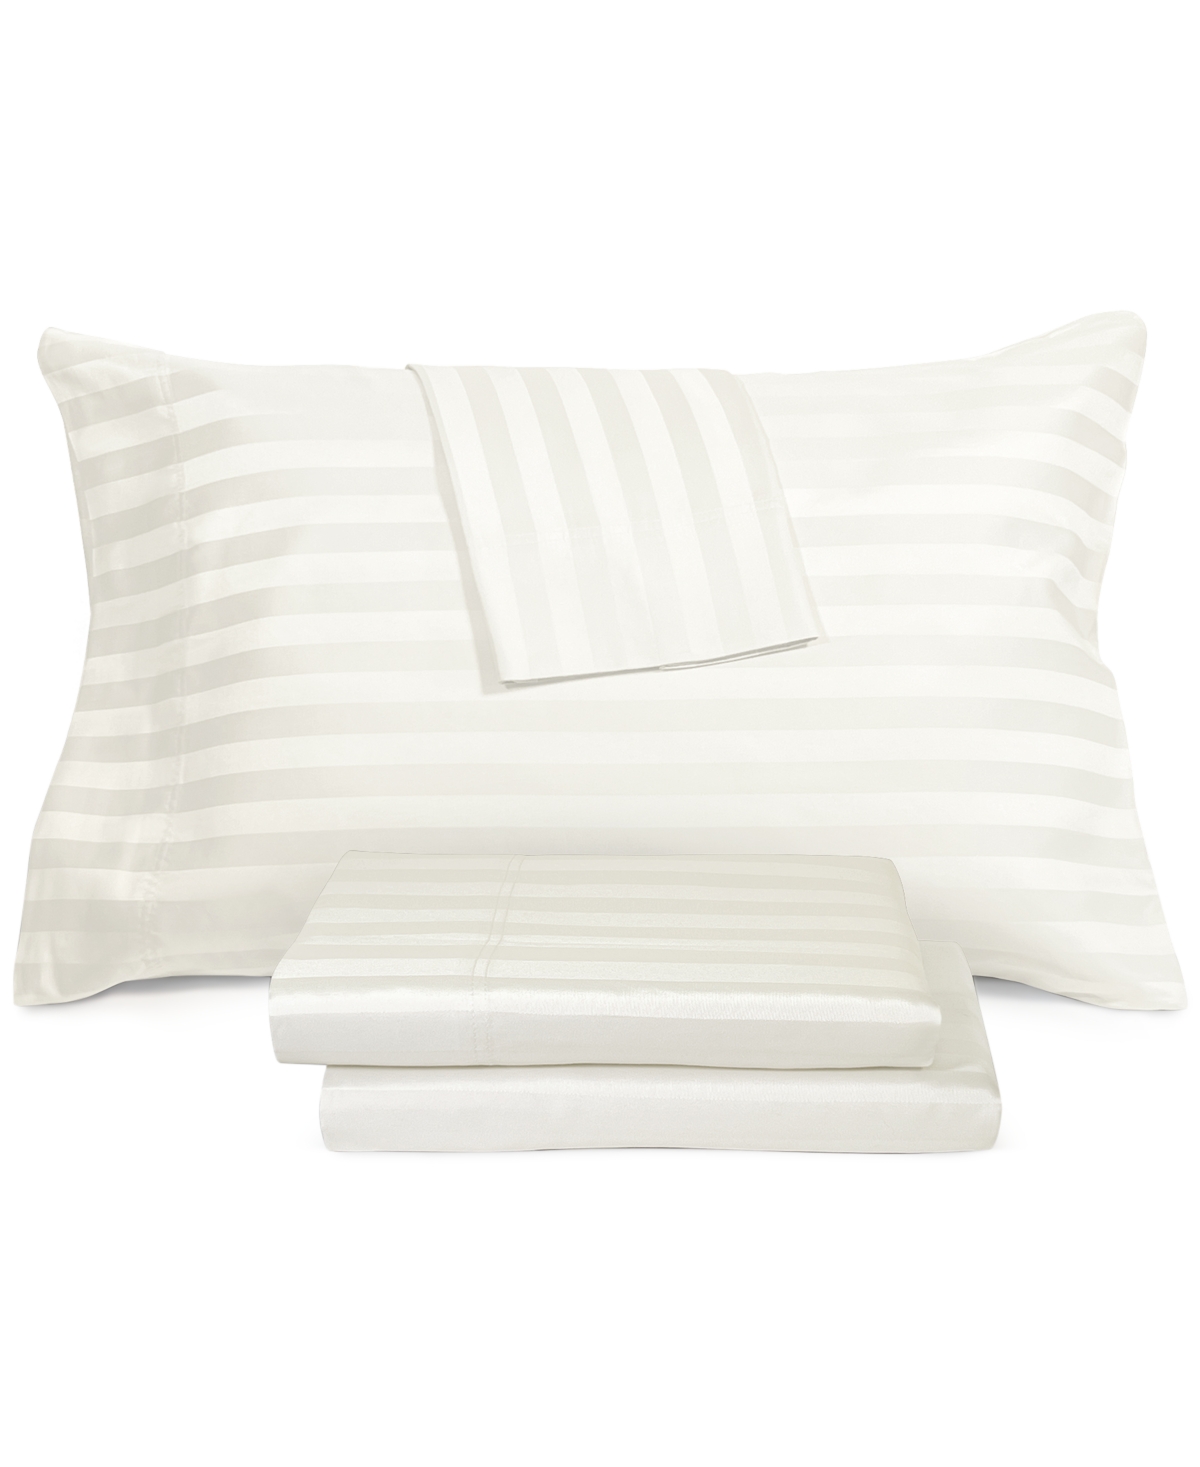 Aq Textiles Ultra Lux Wide Stripe 1000-thread Count 4-pc. King Sheet Set Bedding In Ivory